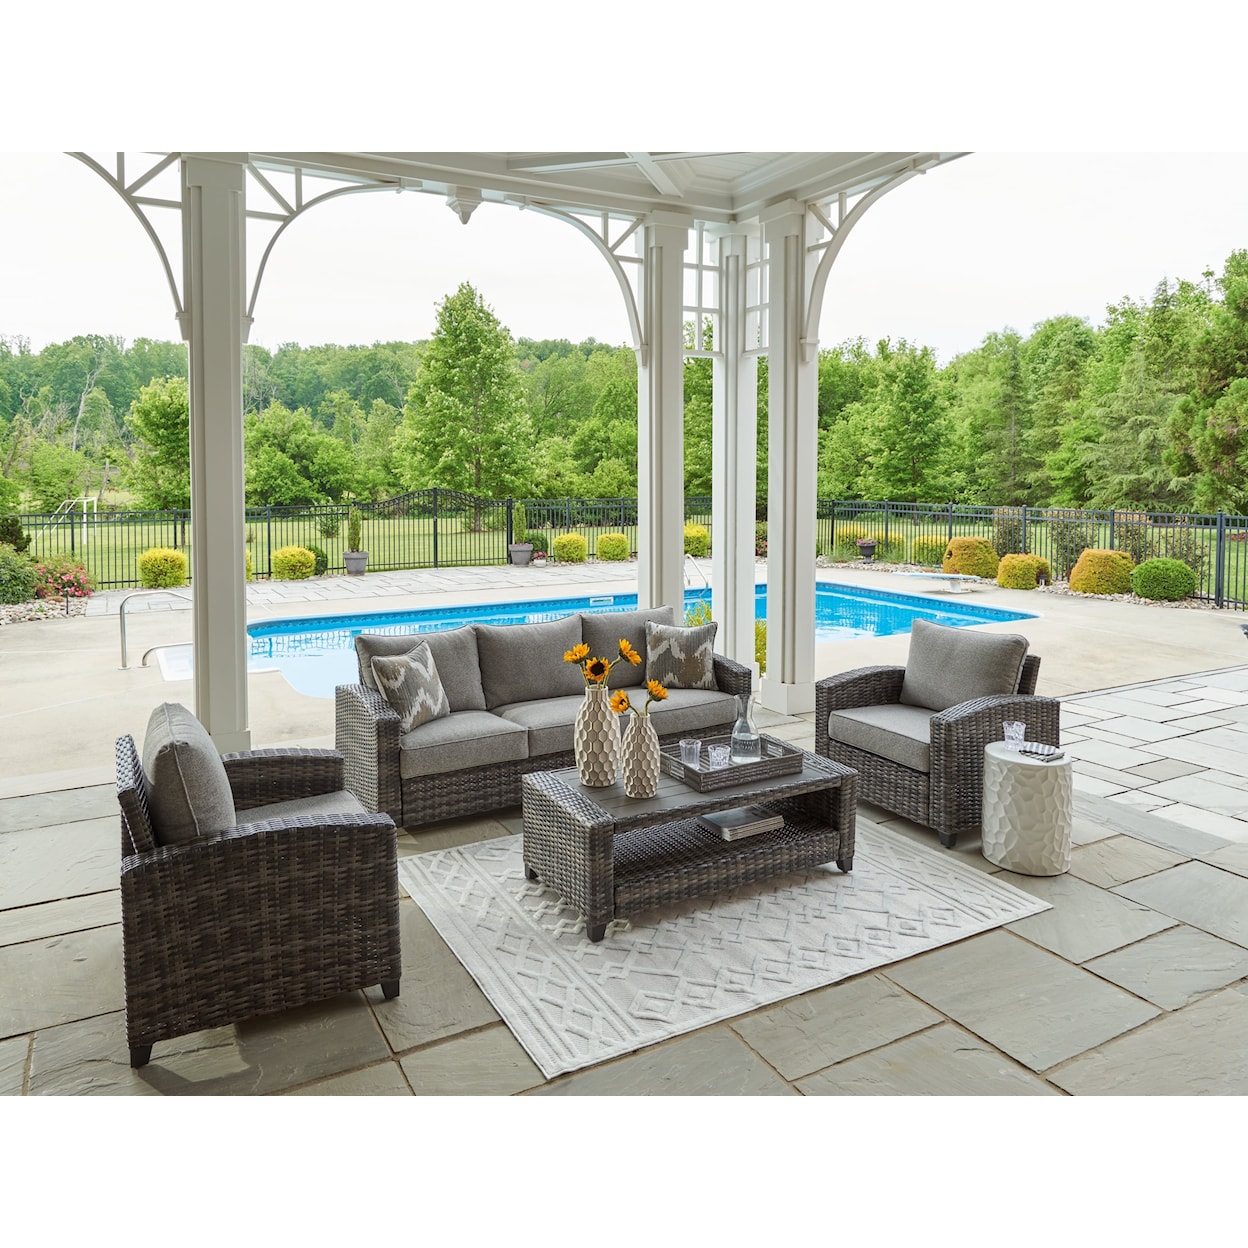 Signature Design Oasis Court Outdoor Sofa/Chairs/Table Set (Set of 4)